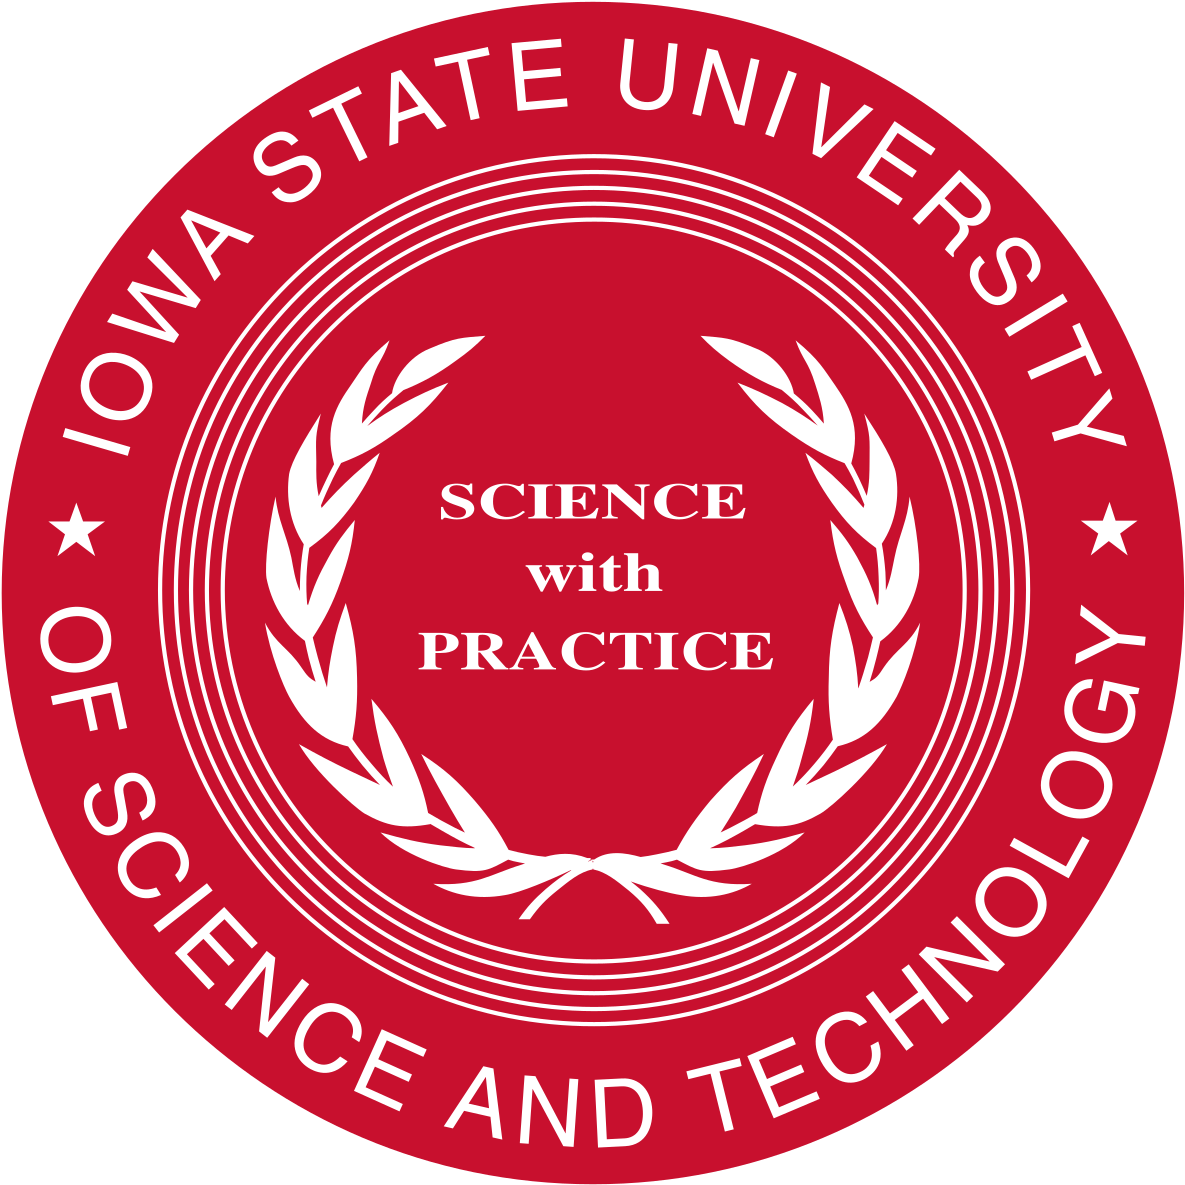 Iowa State University Of Science And Technology (1200x1200)